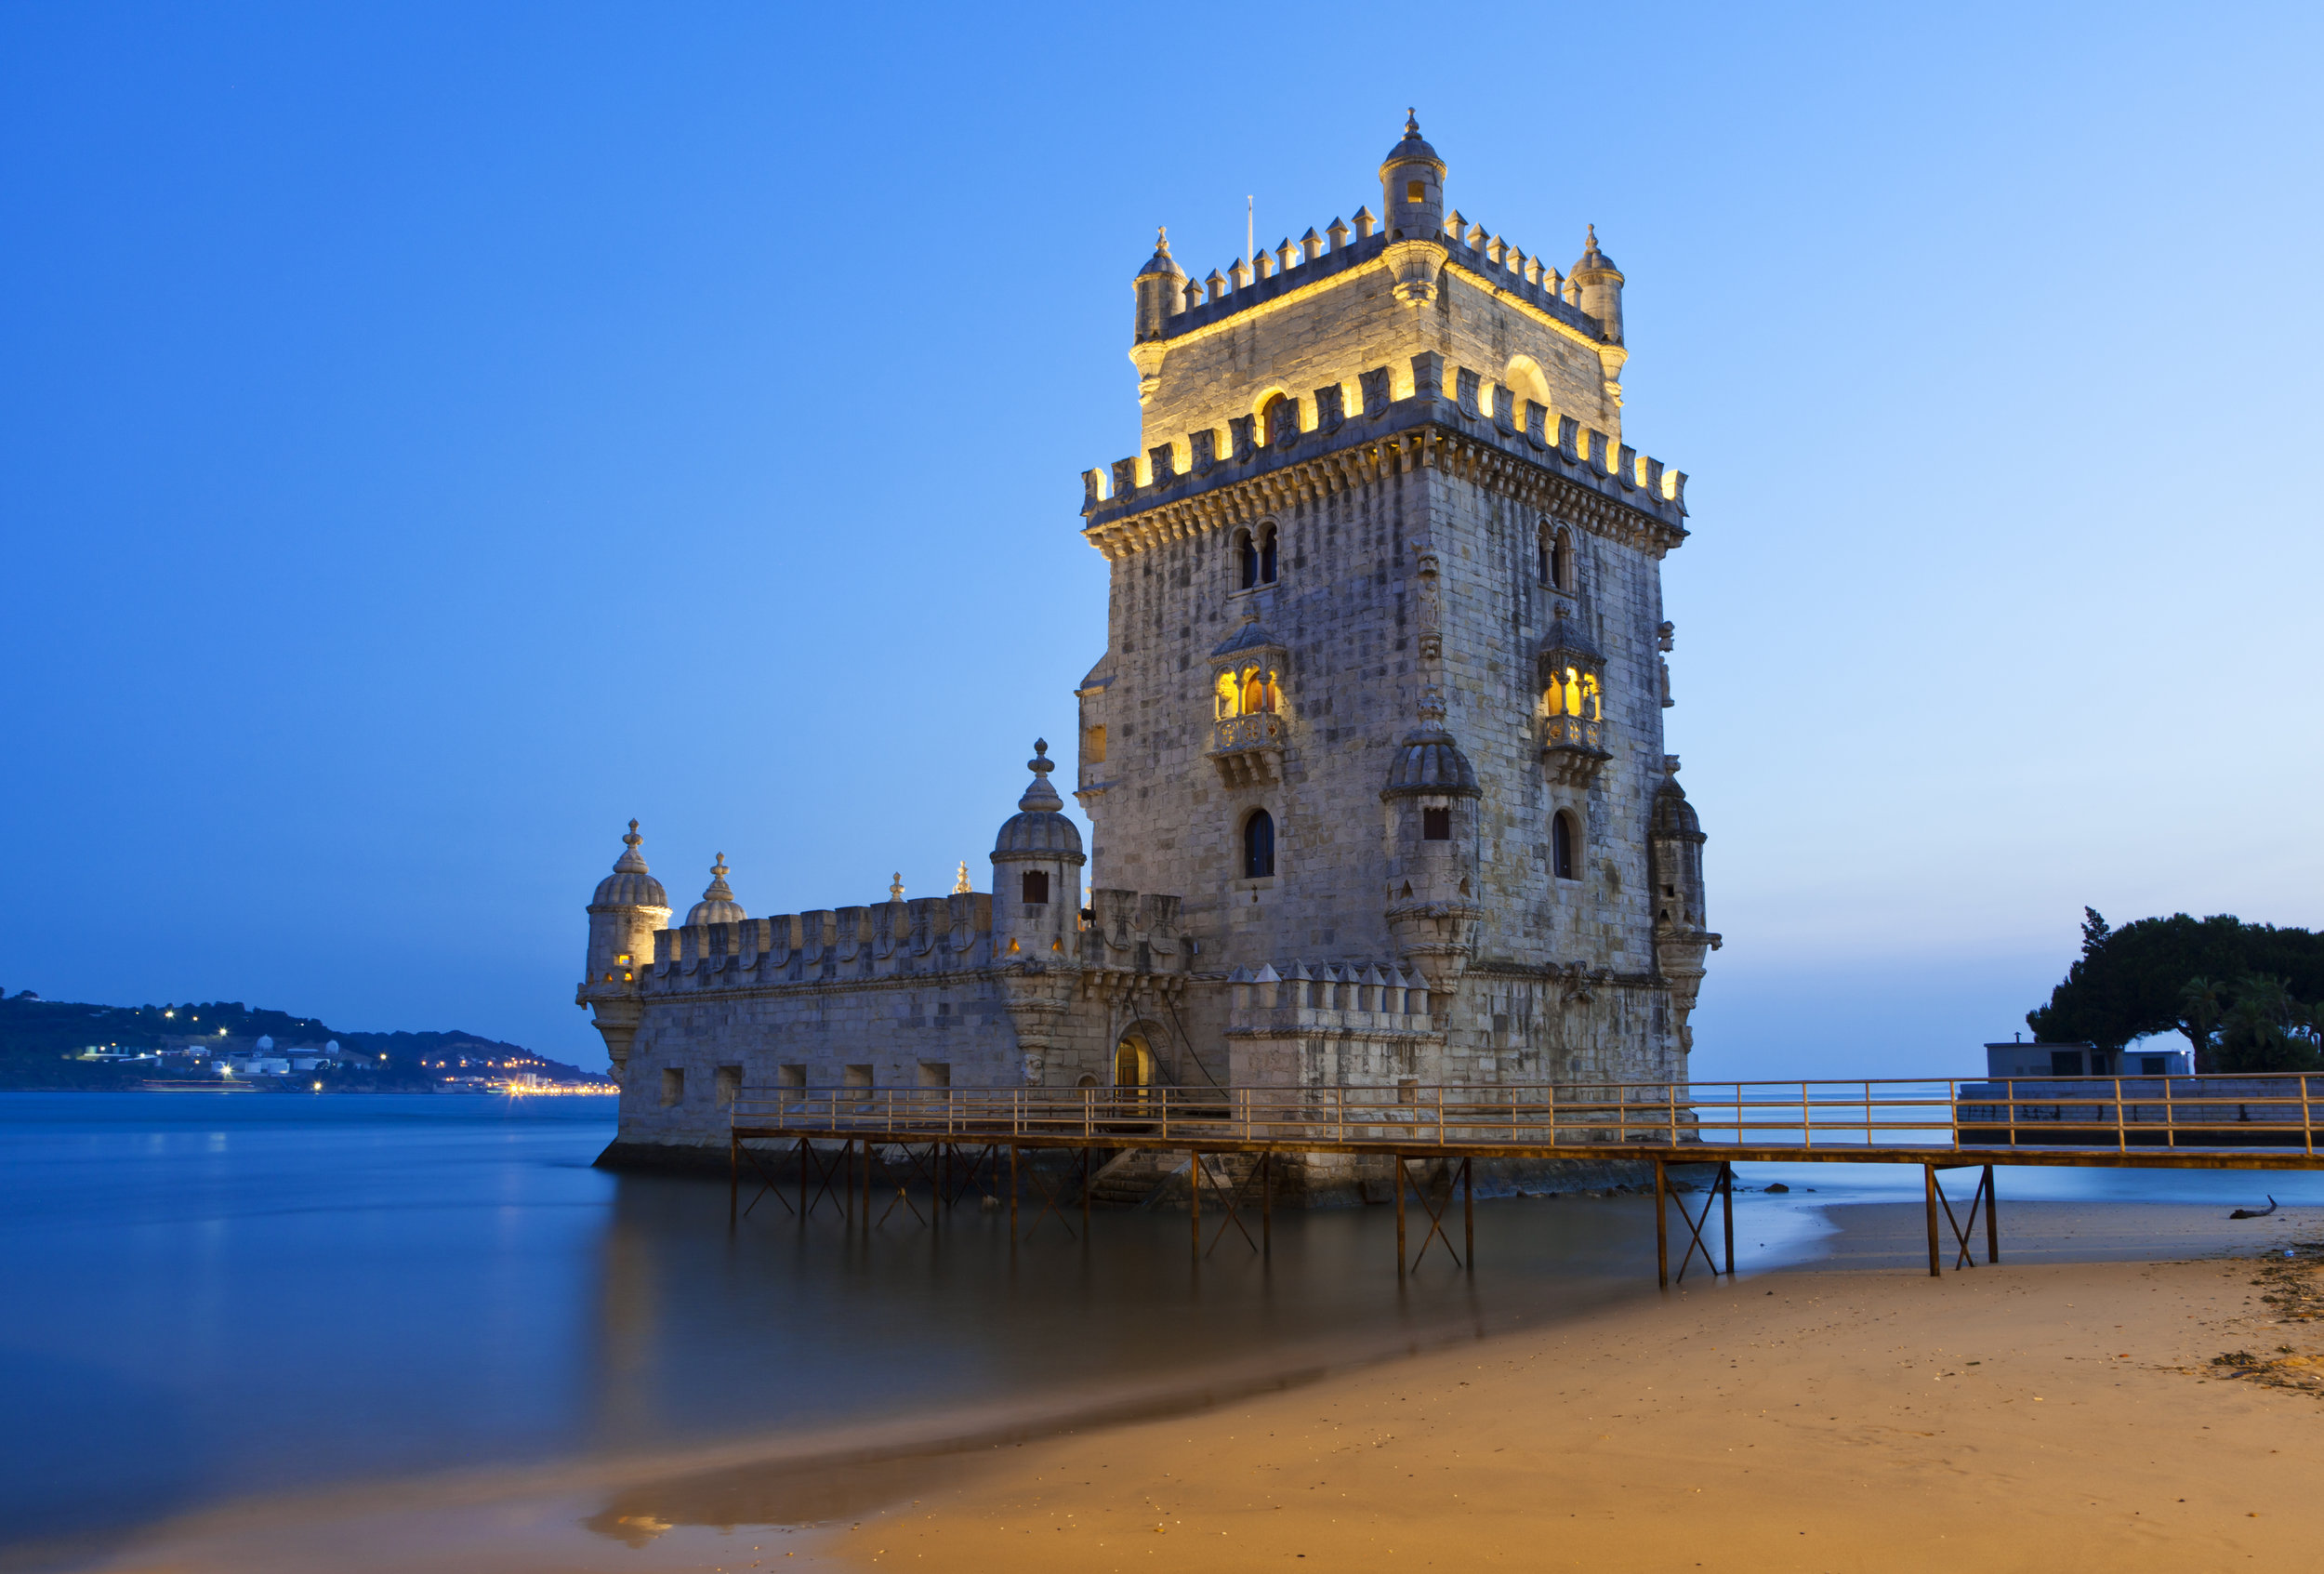 bigstock-The-famous-Tower-of-Belem-at-L-48248372.jpg